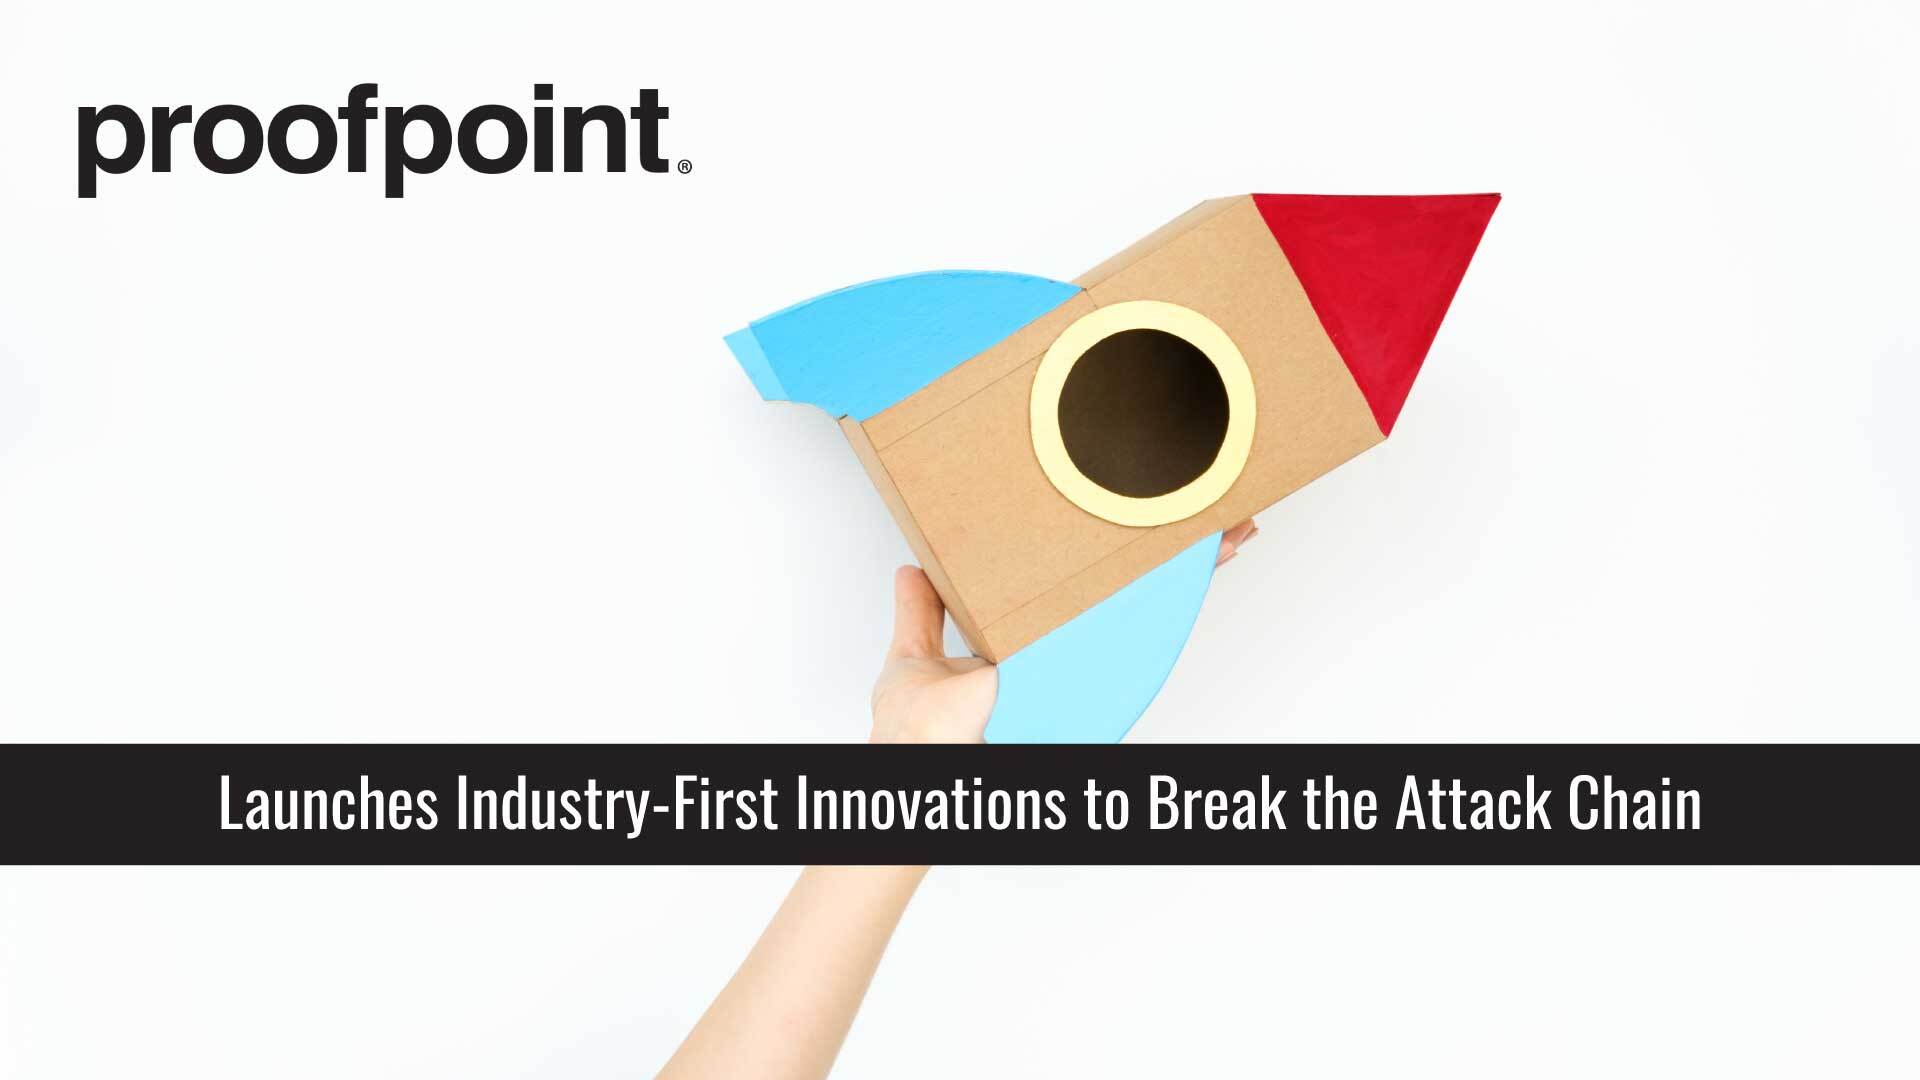 Proofpoint Launches Industry-First Innovations to Break the Attack Chain